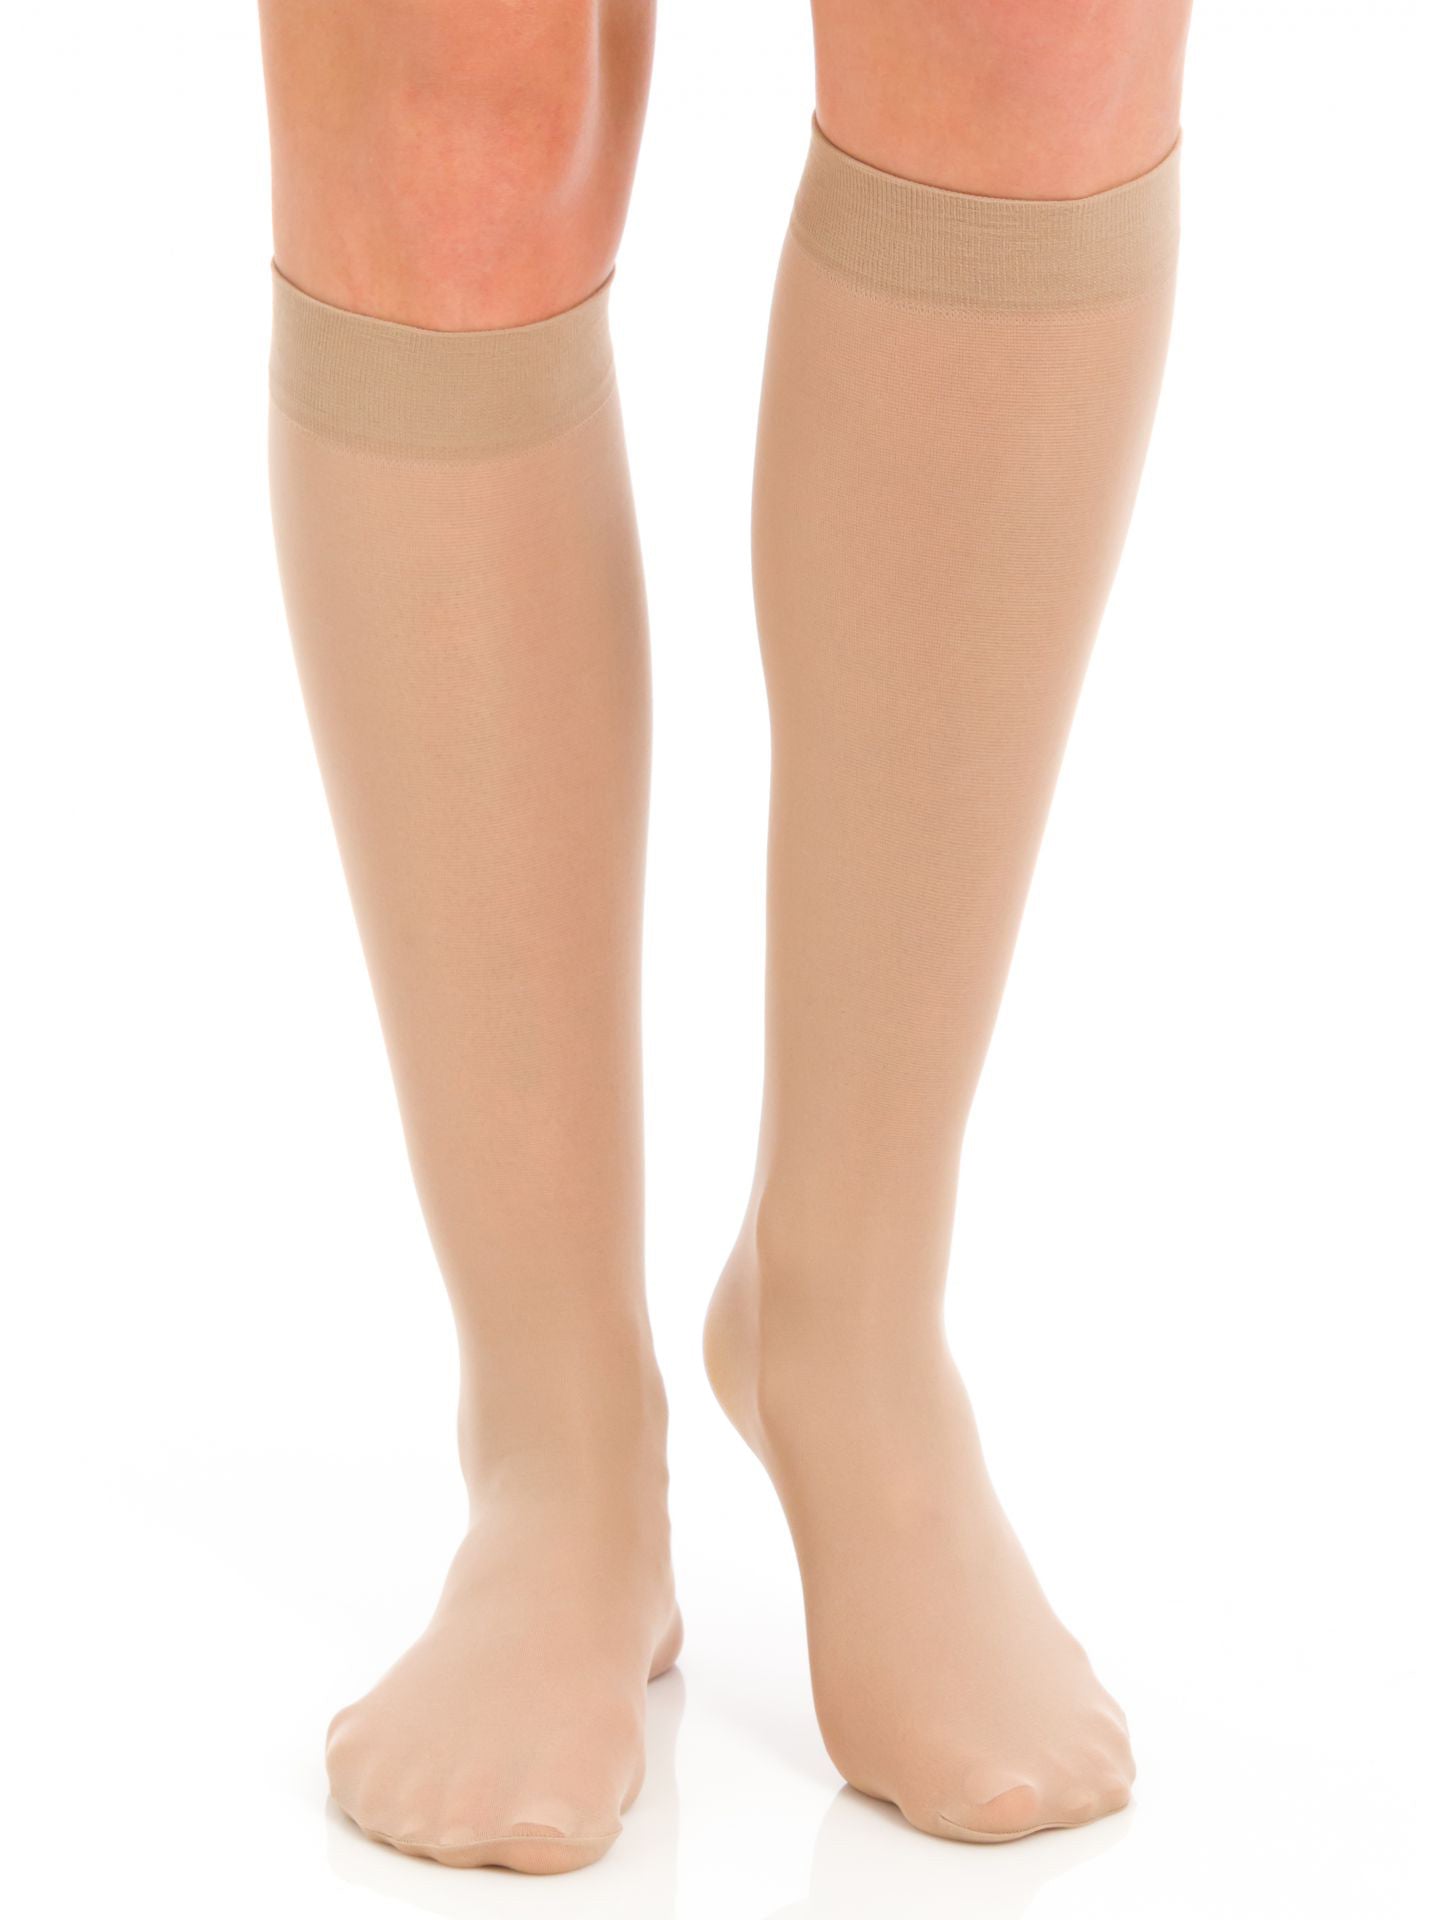 3 Pair Pack Opaque Trouser Knee High with Sandalfoot Toe - 6523